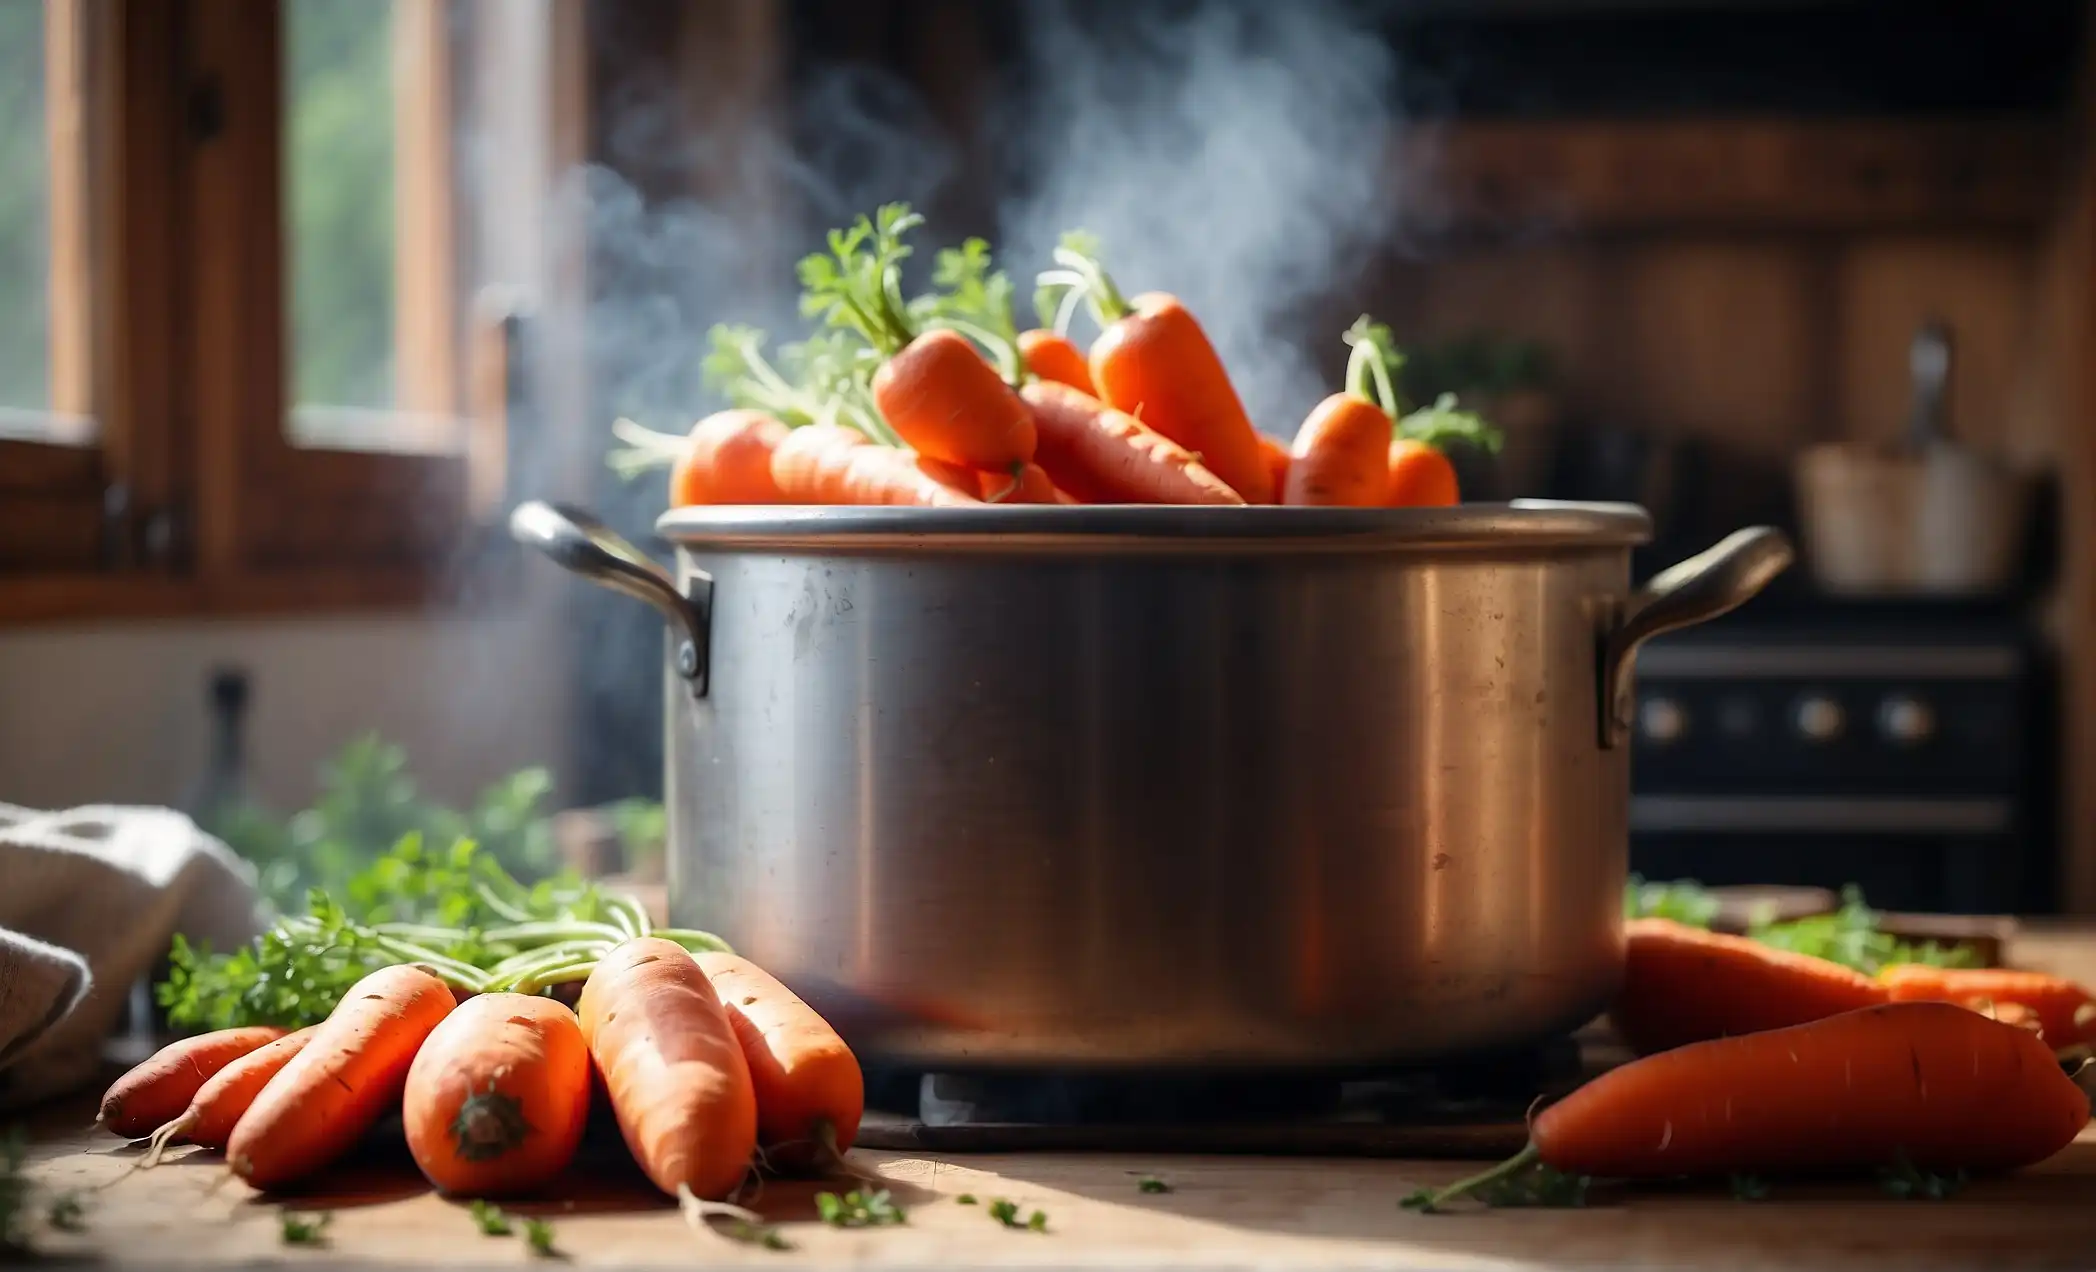 Softening carrots in a rustic kitchen